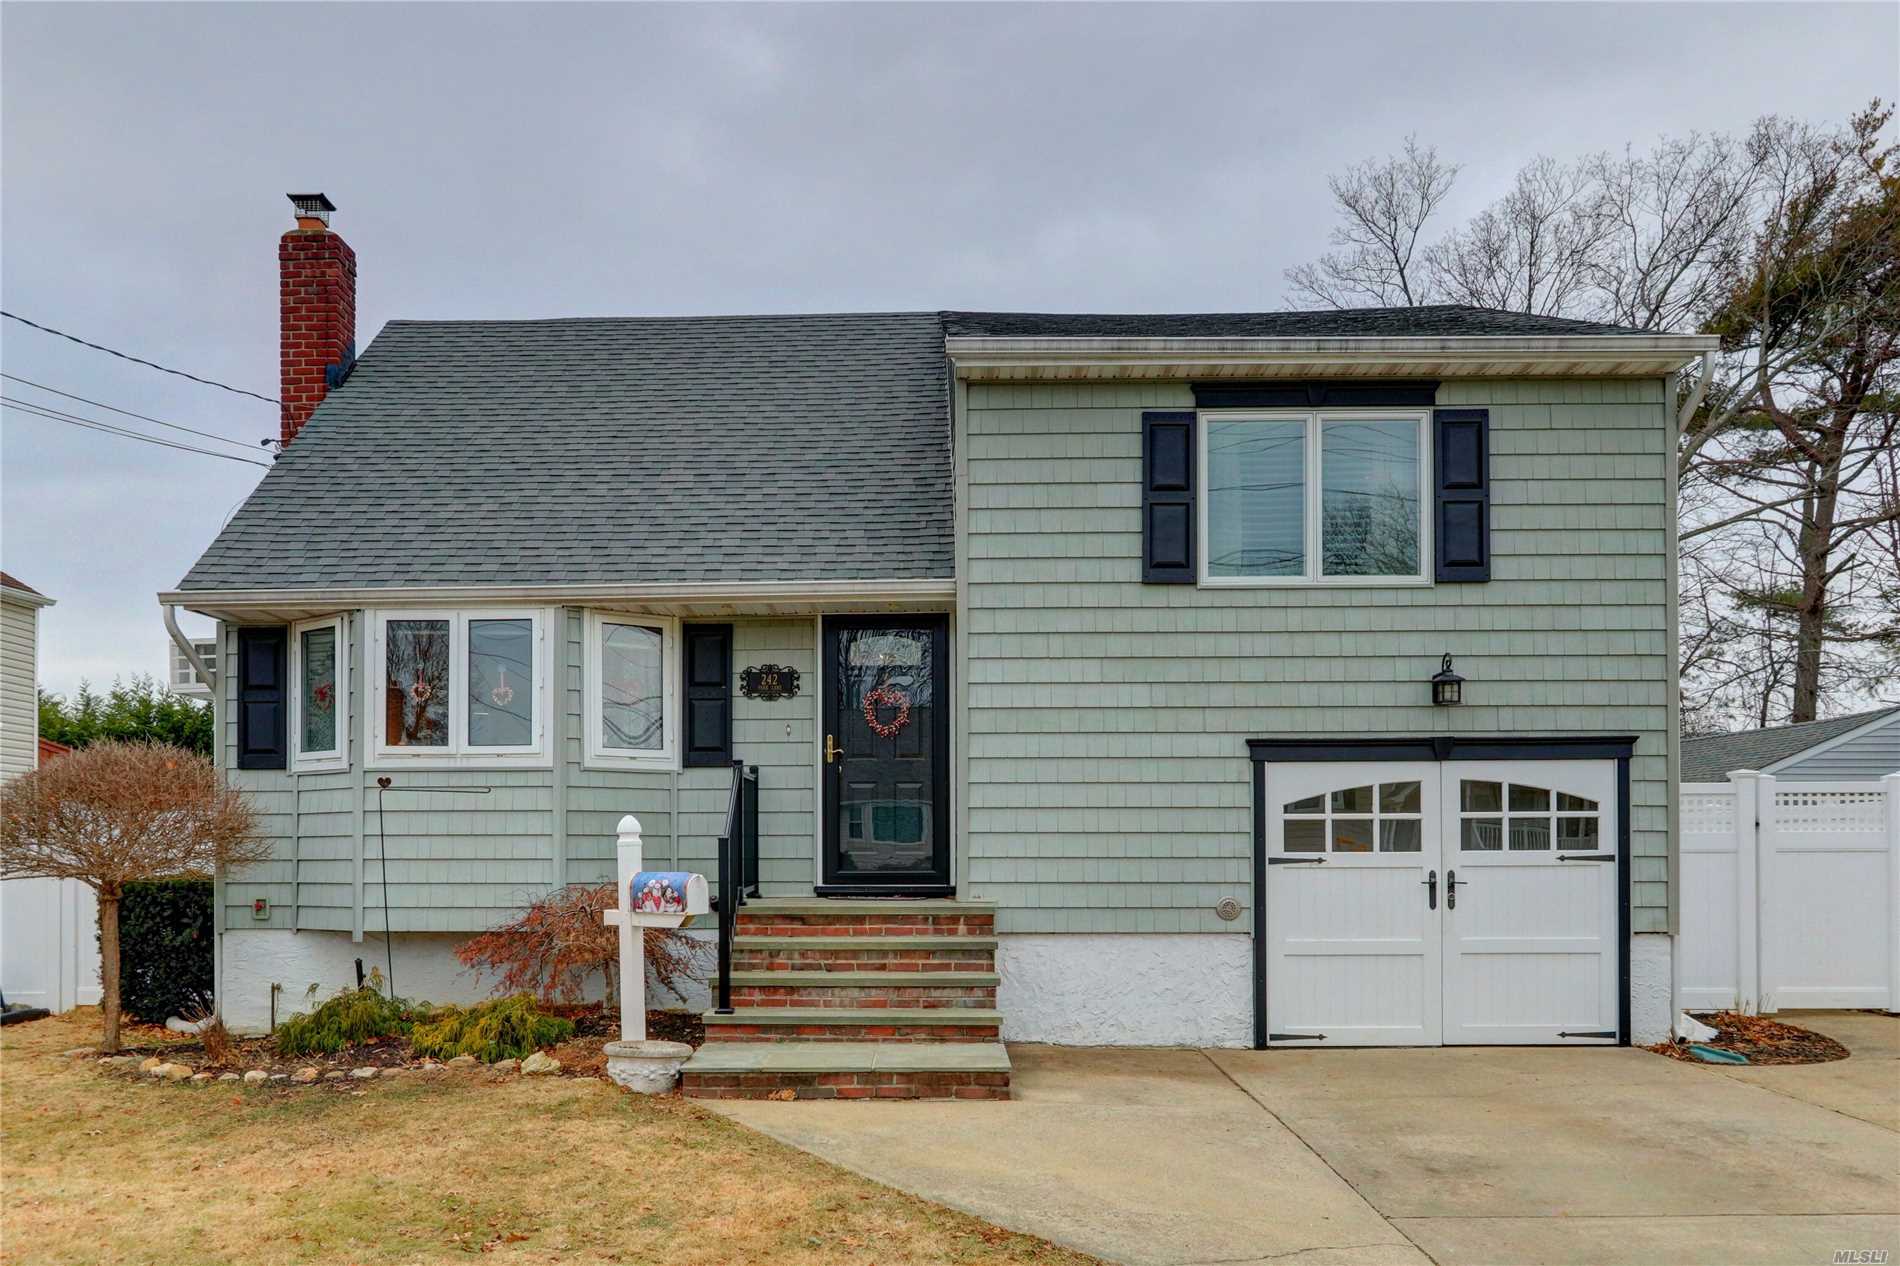 Welcome Home To This Charming 3 Br, 2 Bath Split Located In The Heart Of Massapequa. Minutes From Schools, Shopping And Transportation, This Home Offers Both Convenience For Commuters And A Neighborhood Feel! Situated On An Oversized Lot With Fenced-In Grounds And A Covered Patio; It Makes The Perfect Home For Entertaining For Years To Come!